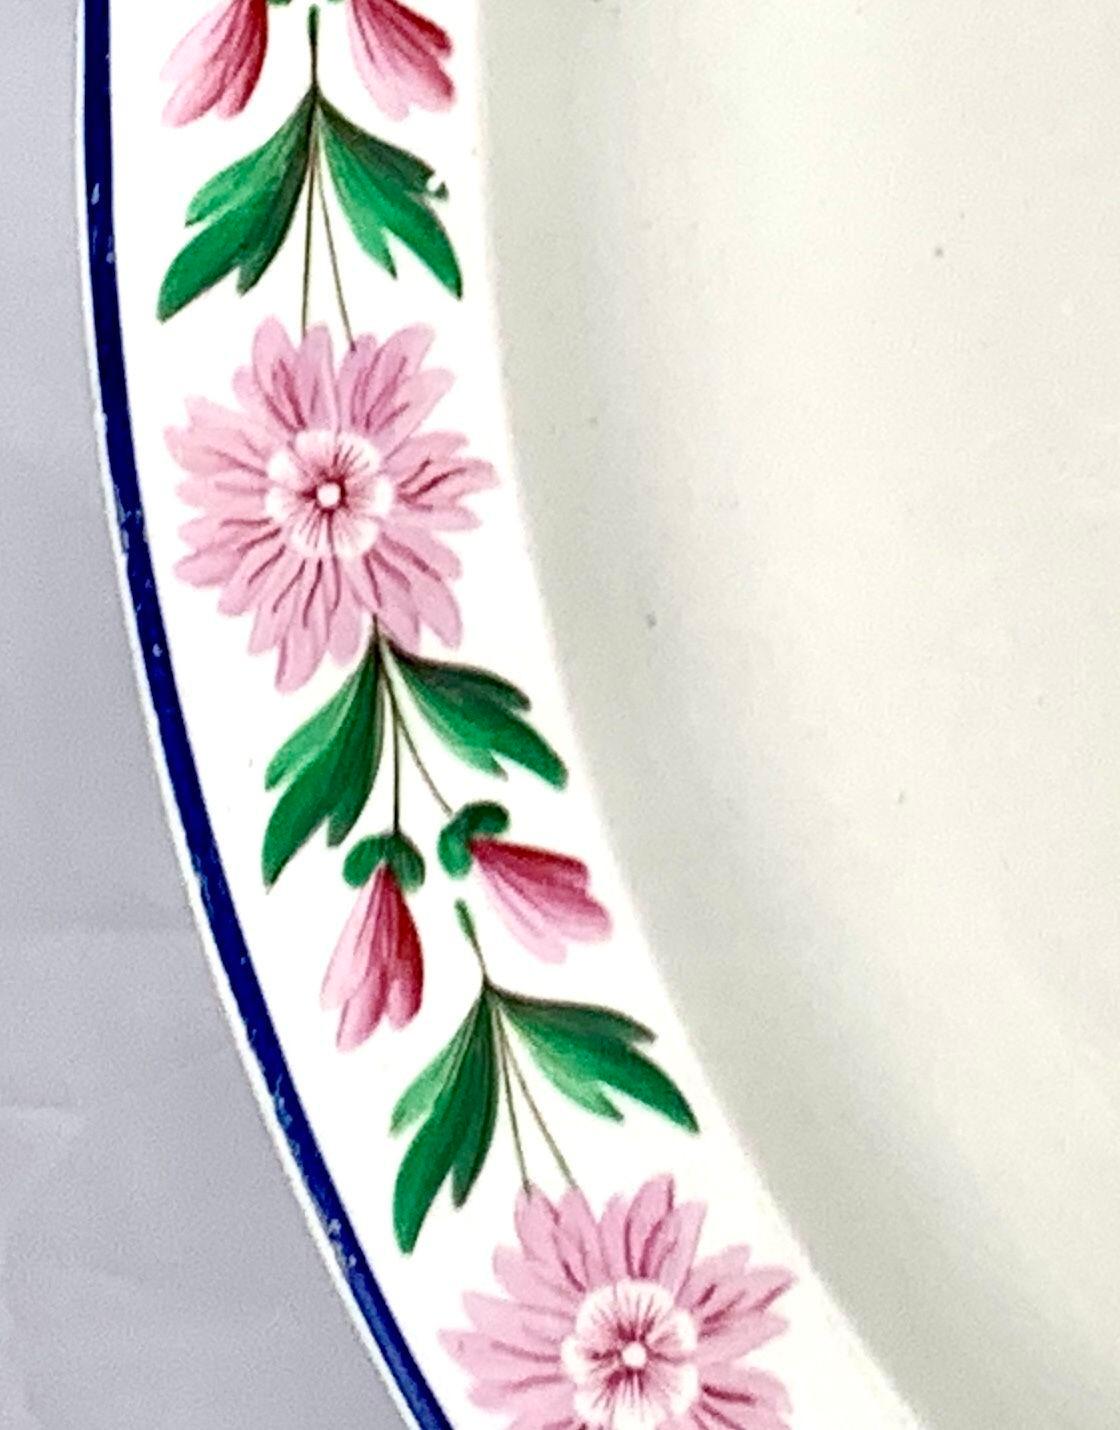 This is a large Wedgwood creamware platter with a beautiful band of pink daisies with green leaves.
The pink and green complement each other perfectly.
It's a happy pattern!
The platter was made in England around 1820 and has the 